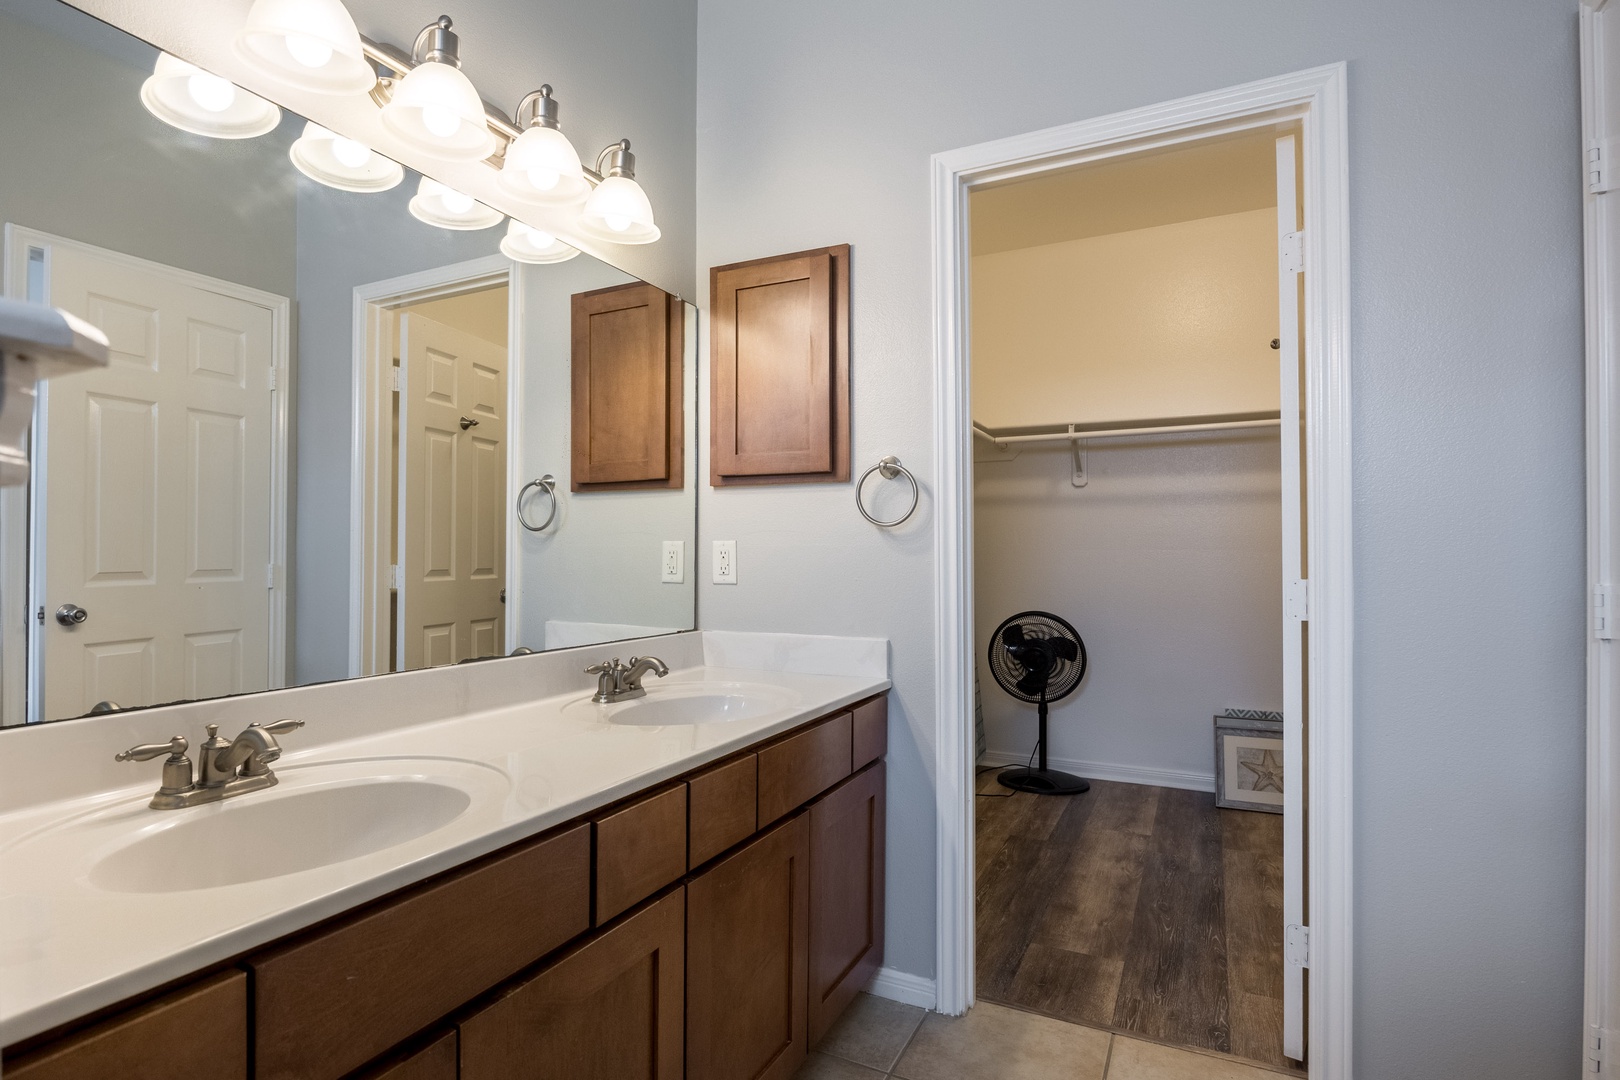 Ensuite bathroom with dual sinks, closet, and shower/tub combo